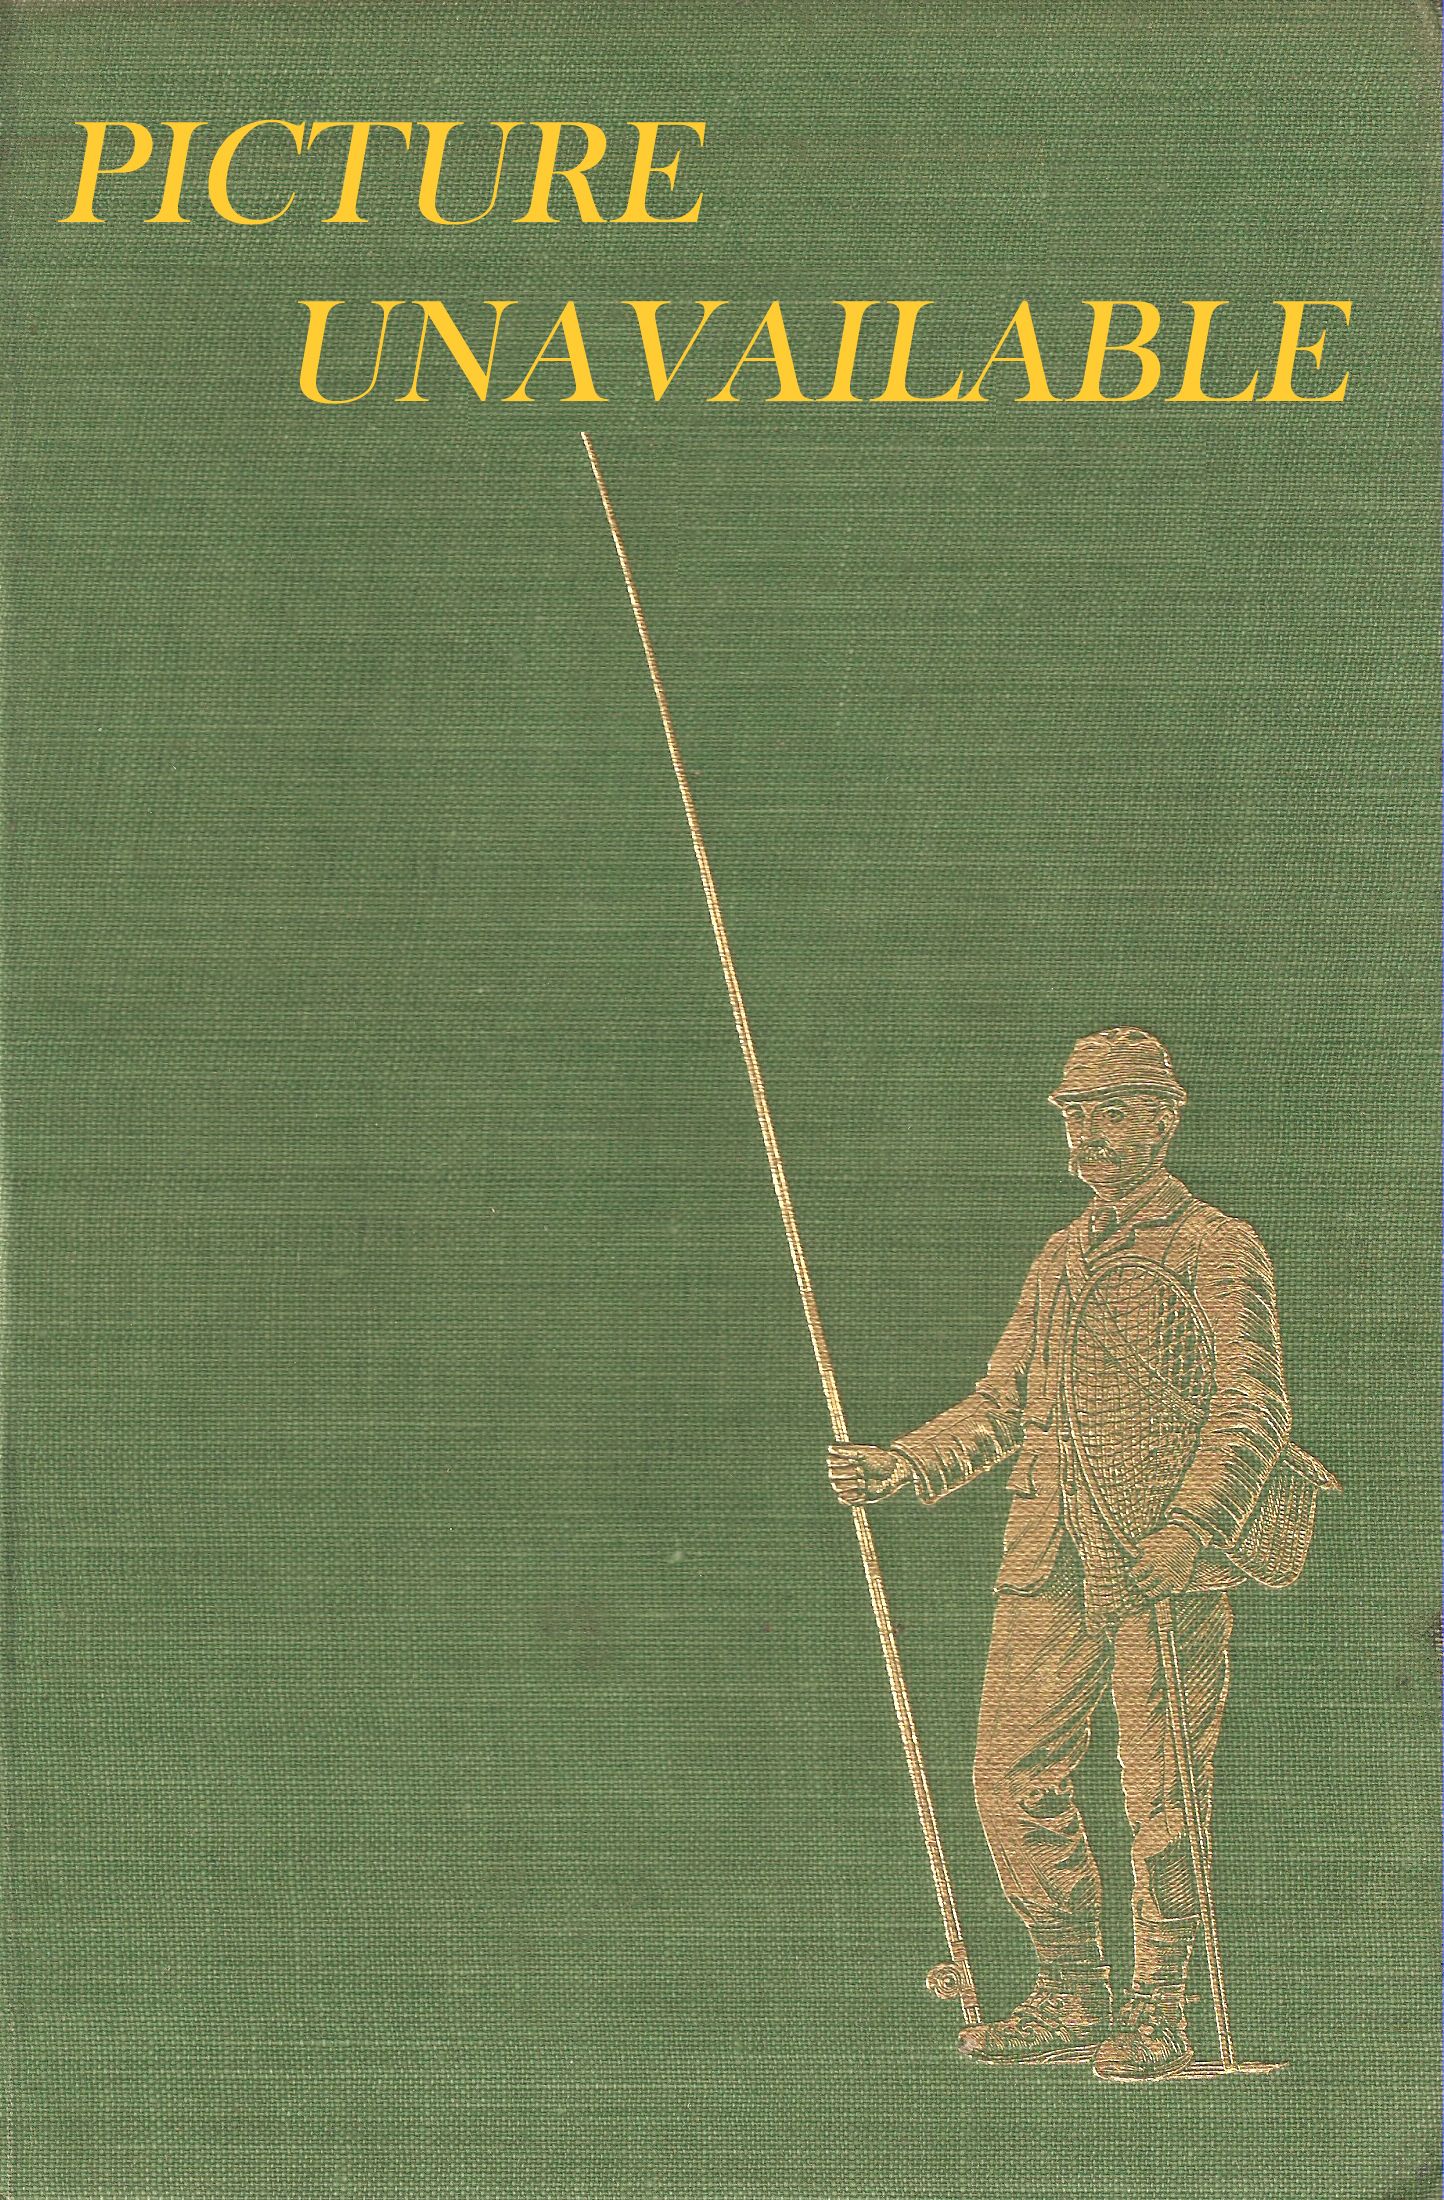 THE COMPLEAT ANGLER'S CATALOG. By Scott Roederer.